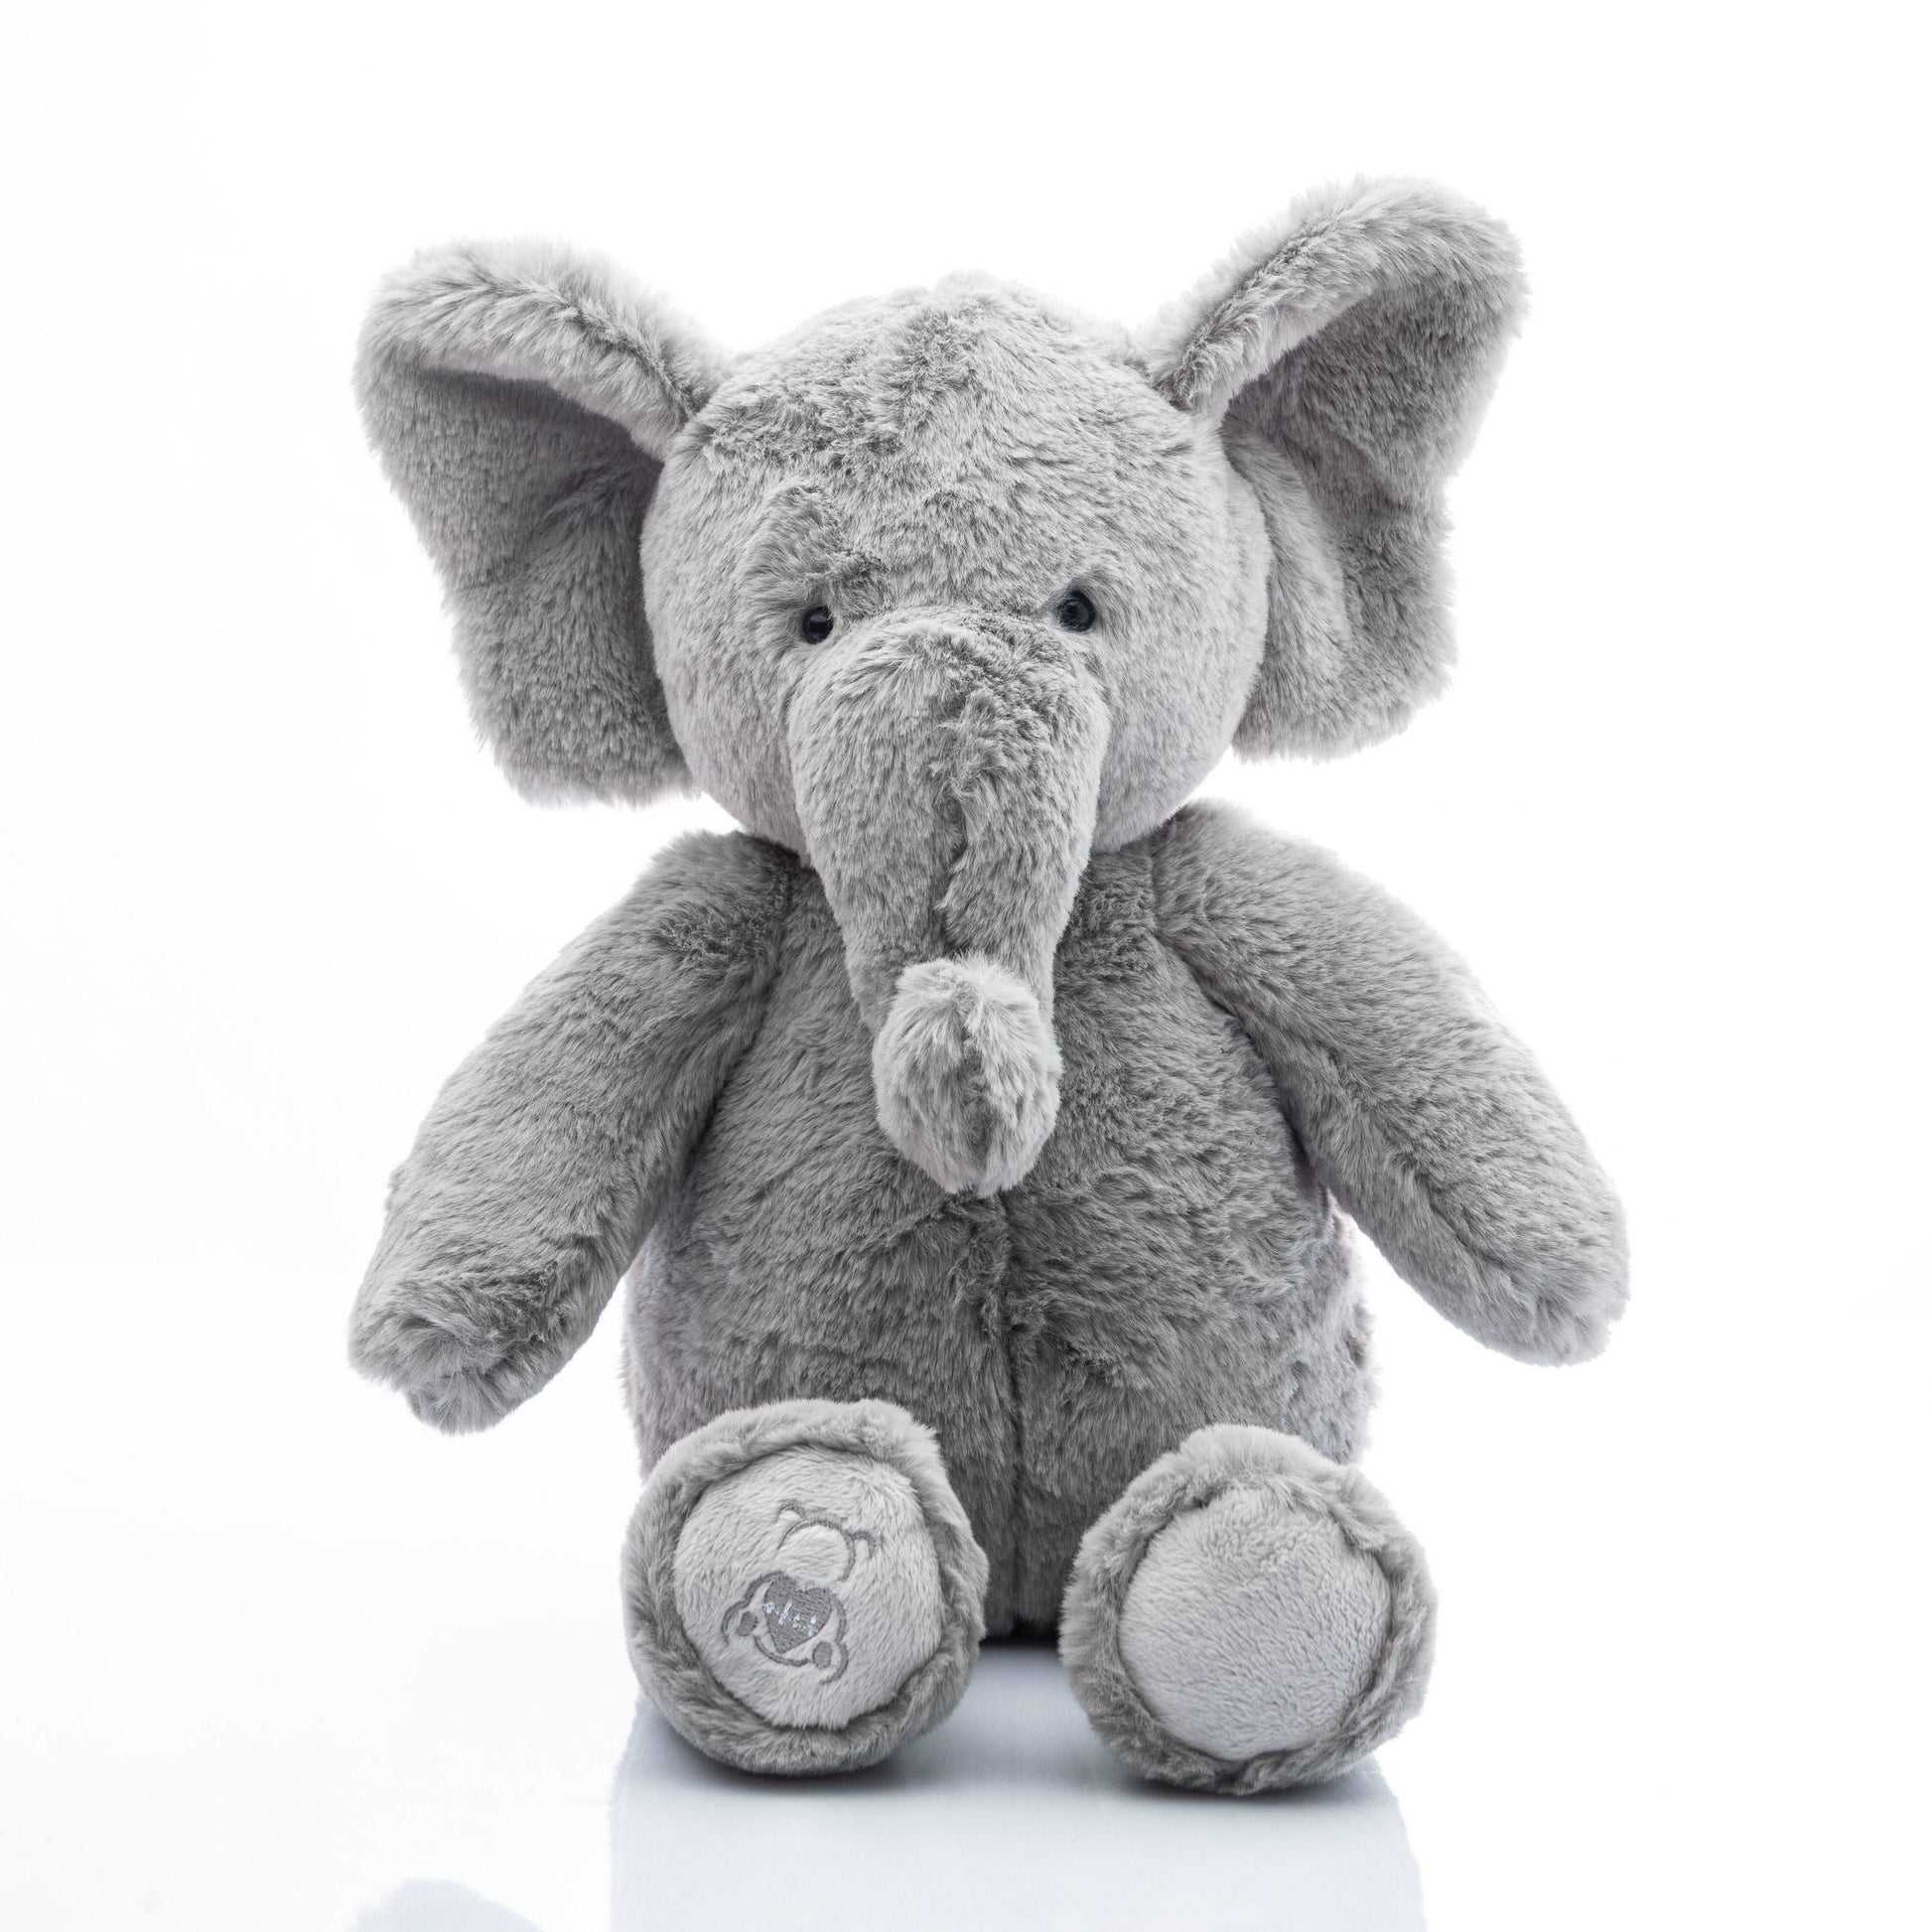 Tembo the Heartbeat Elephant (Includes 20 Second Heart Module)